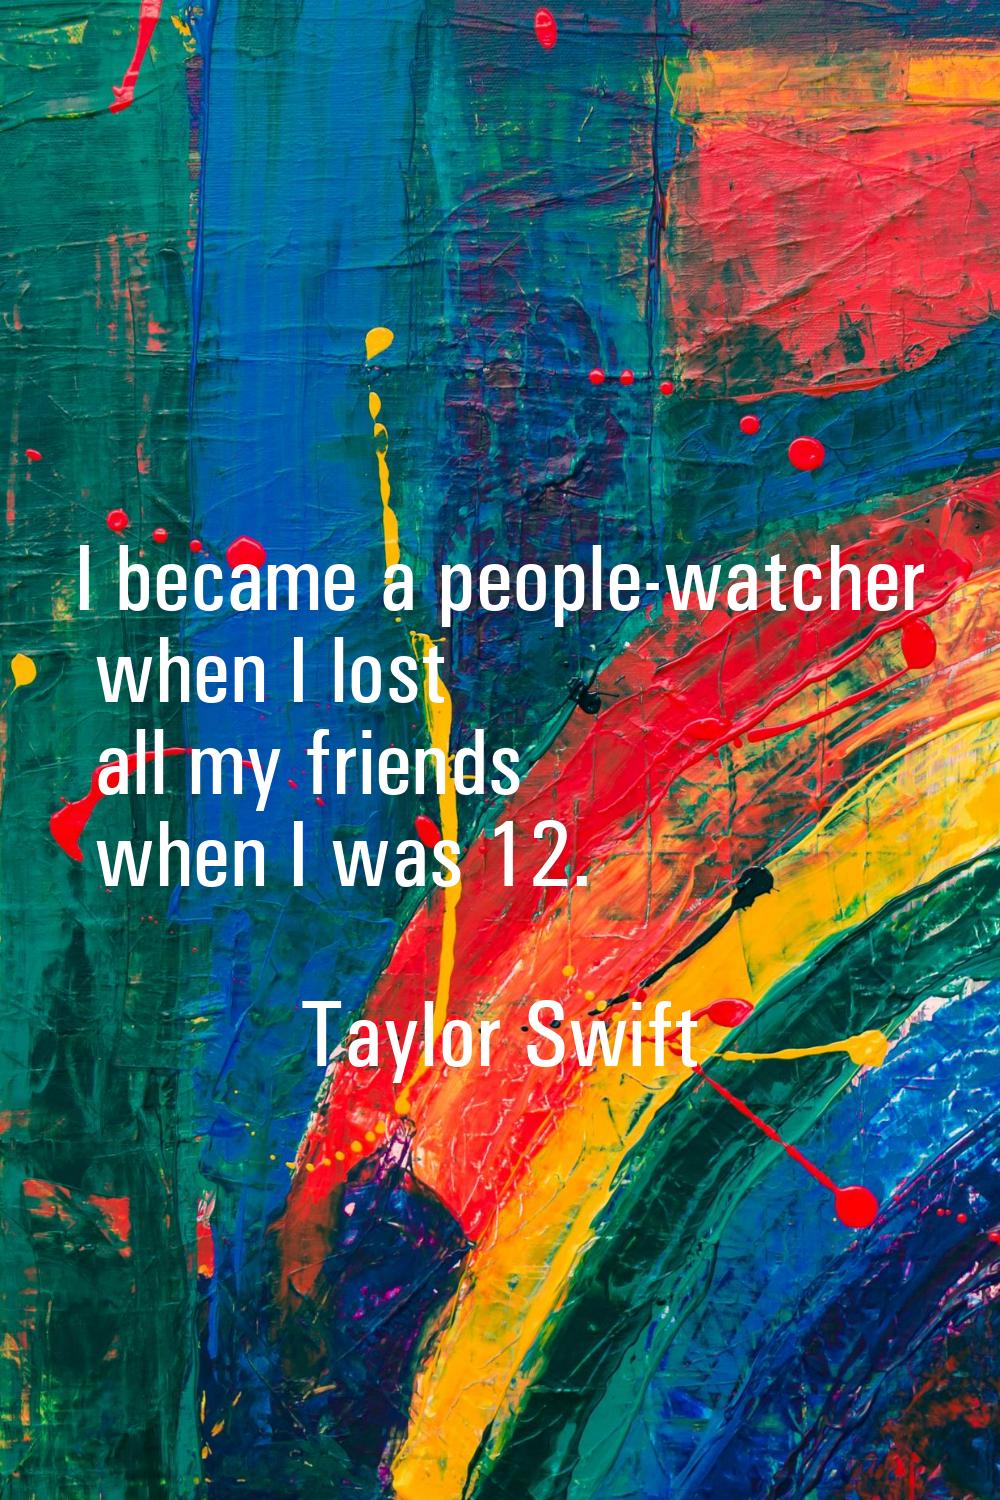 I became a people-watcher when I lost all my friends when I was 12.